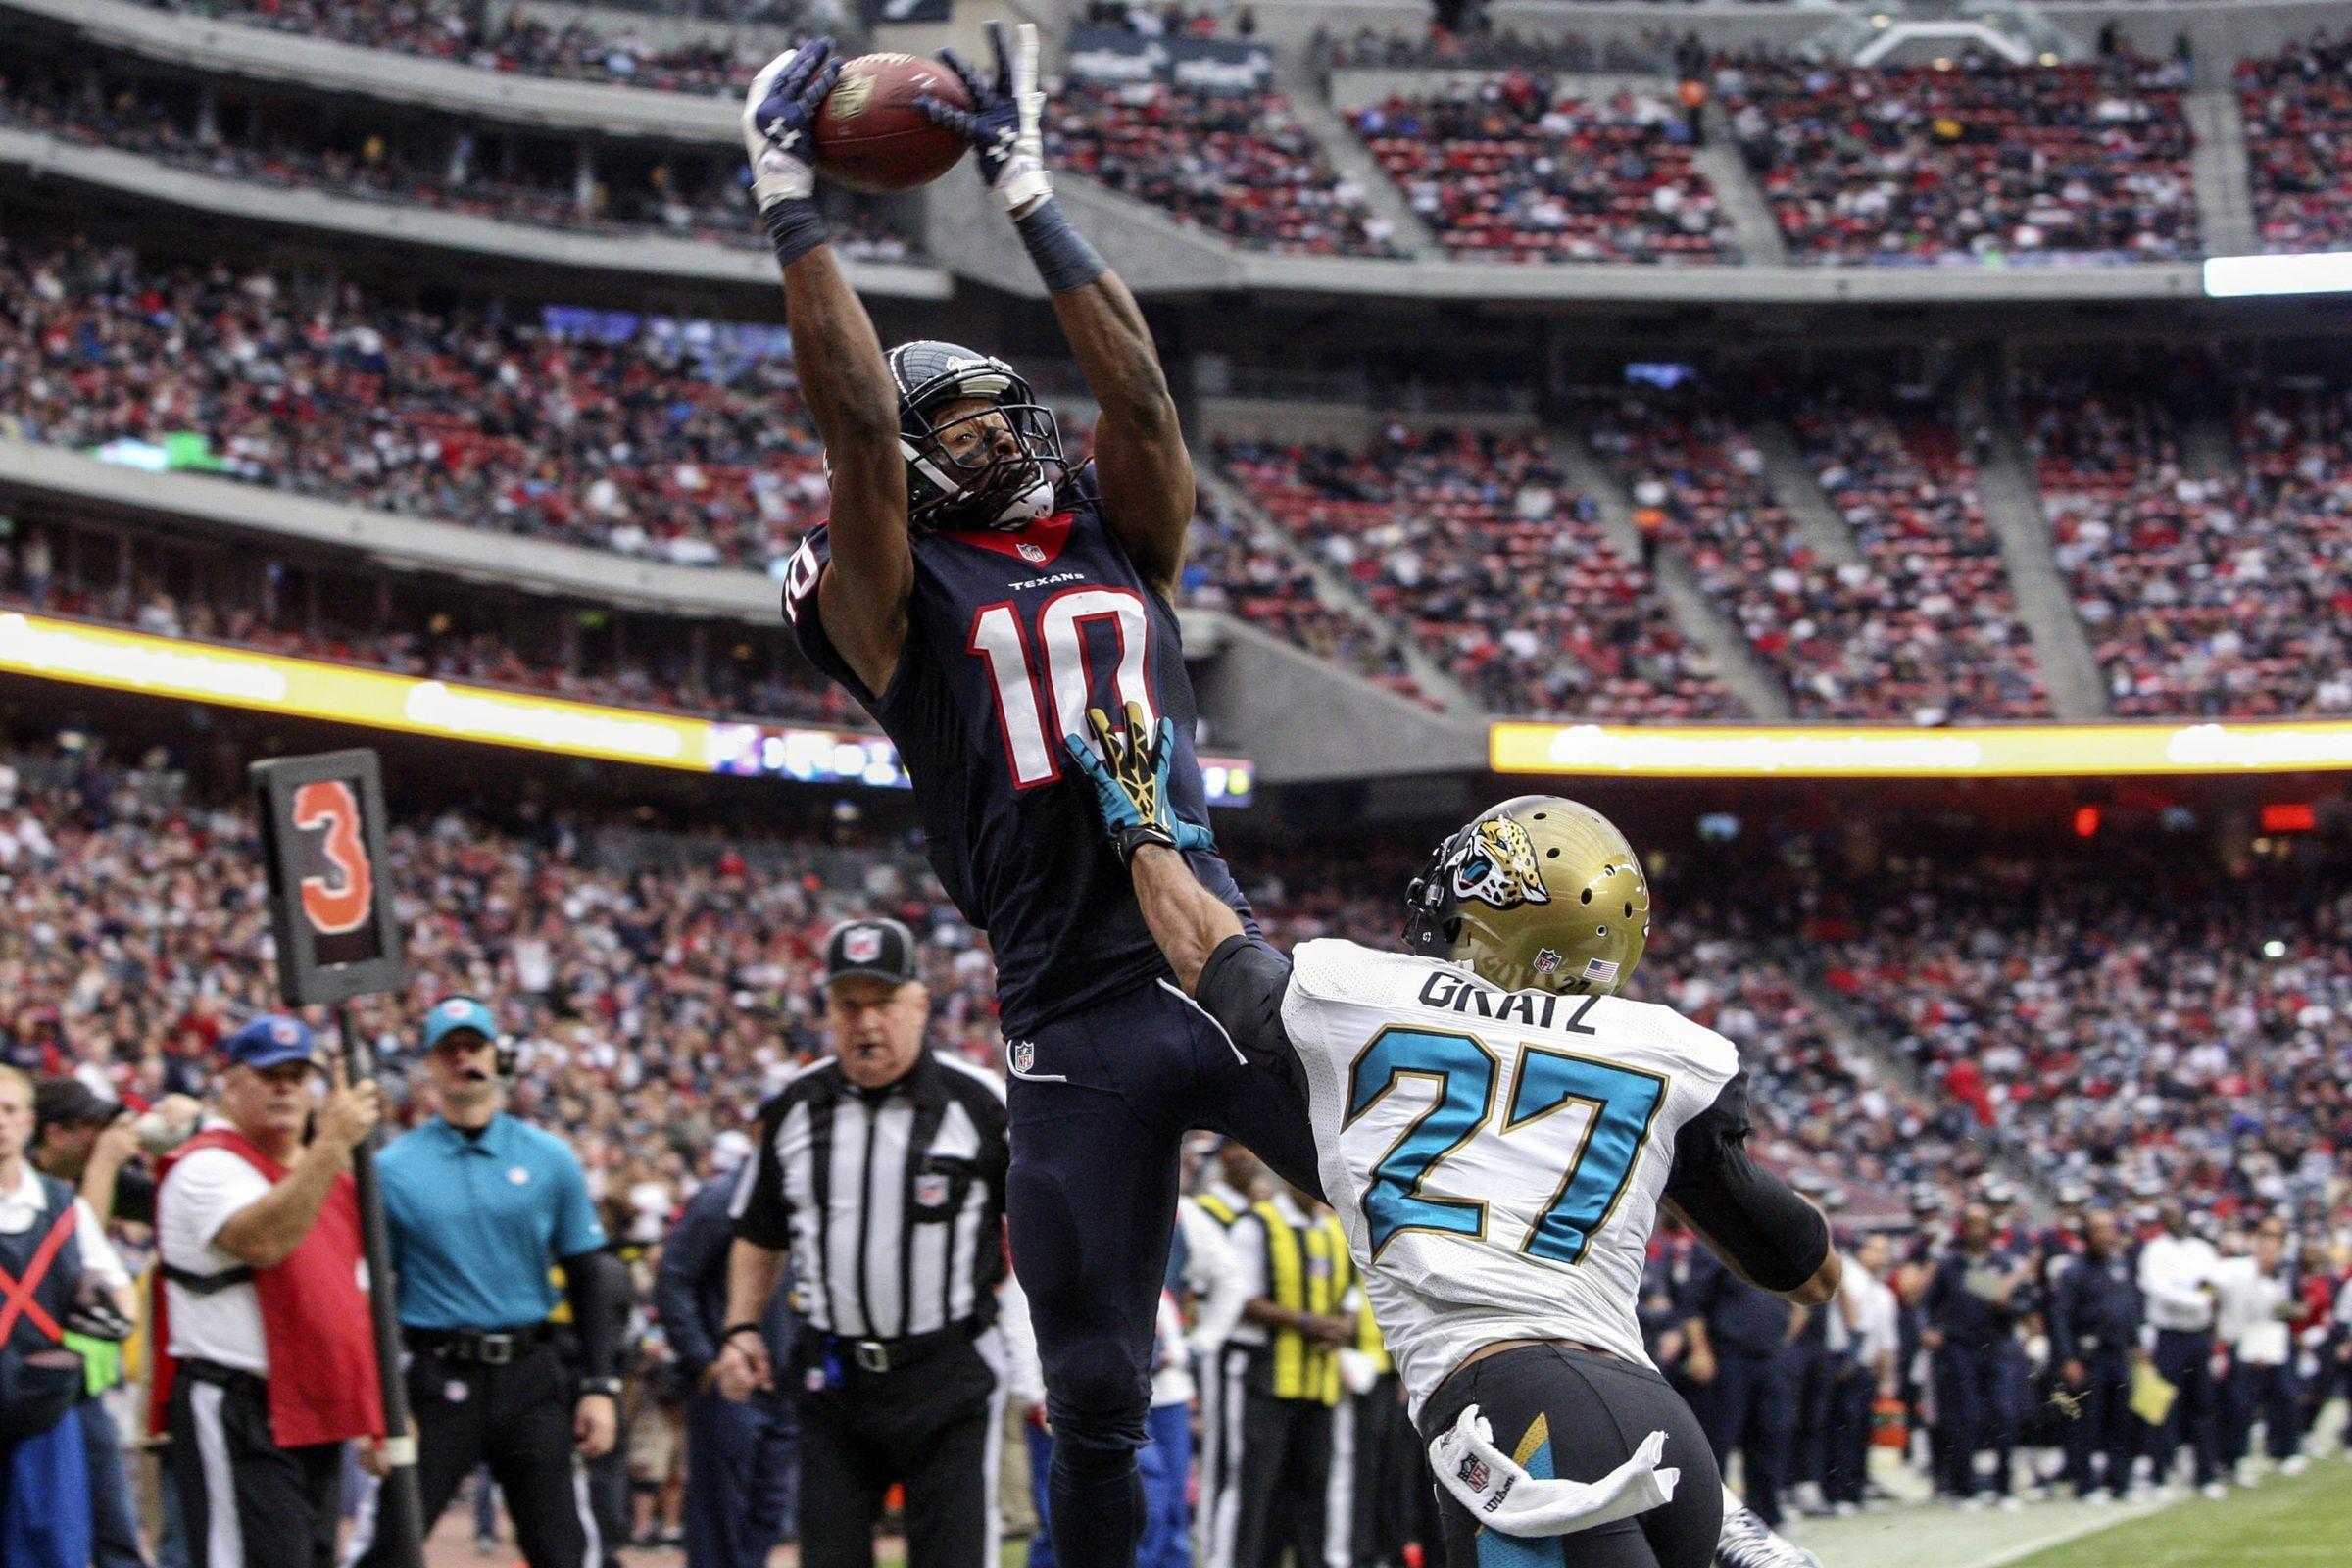 NFL 2015 Best Wide Receiver is Texans' DeAndre Hopkins? 'I'm the Best'